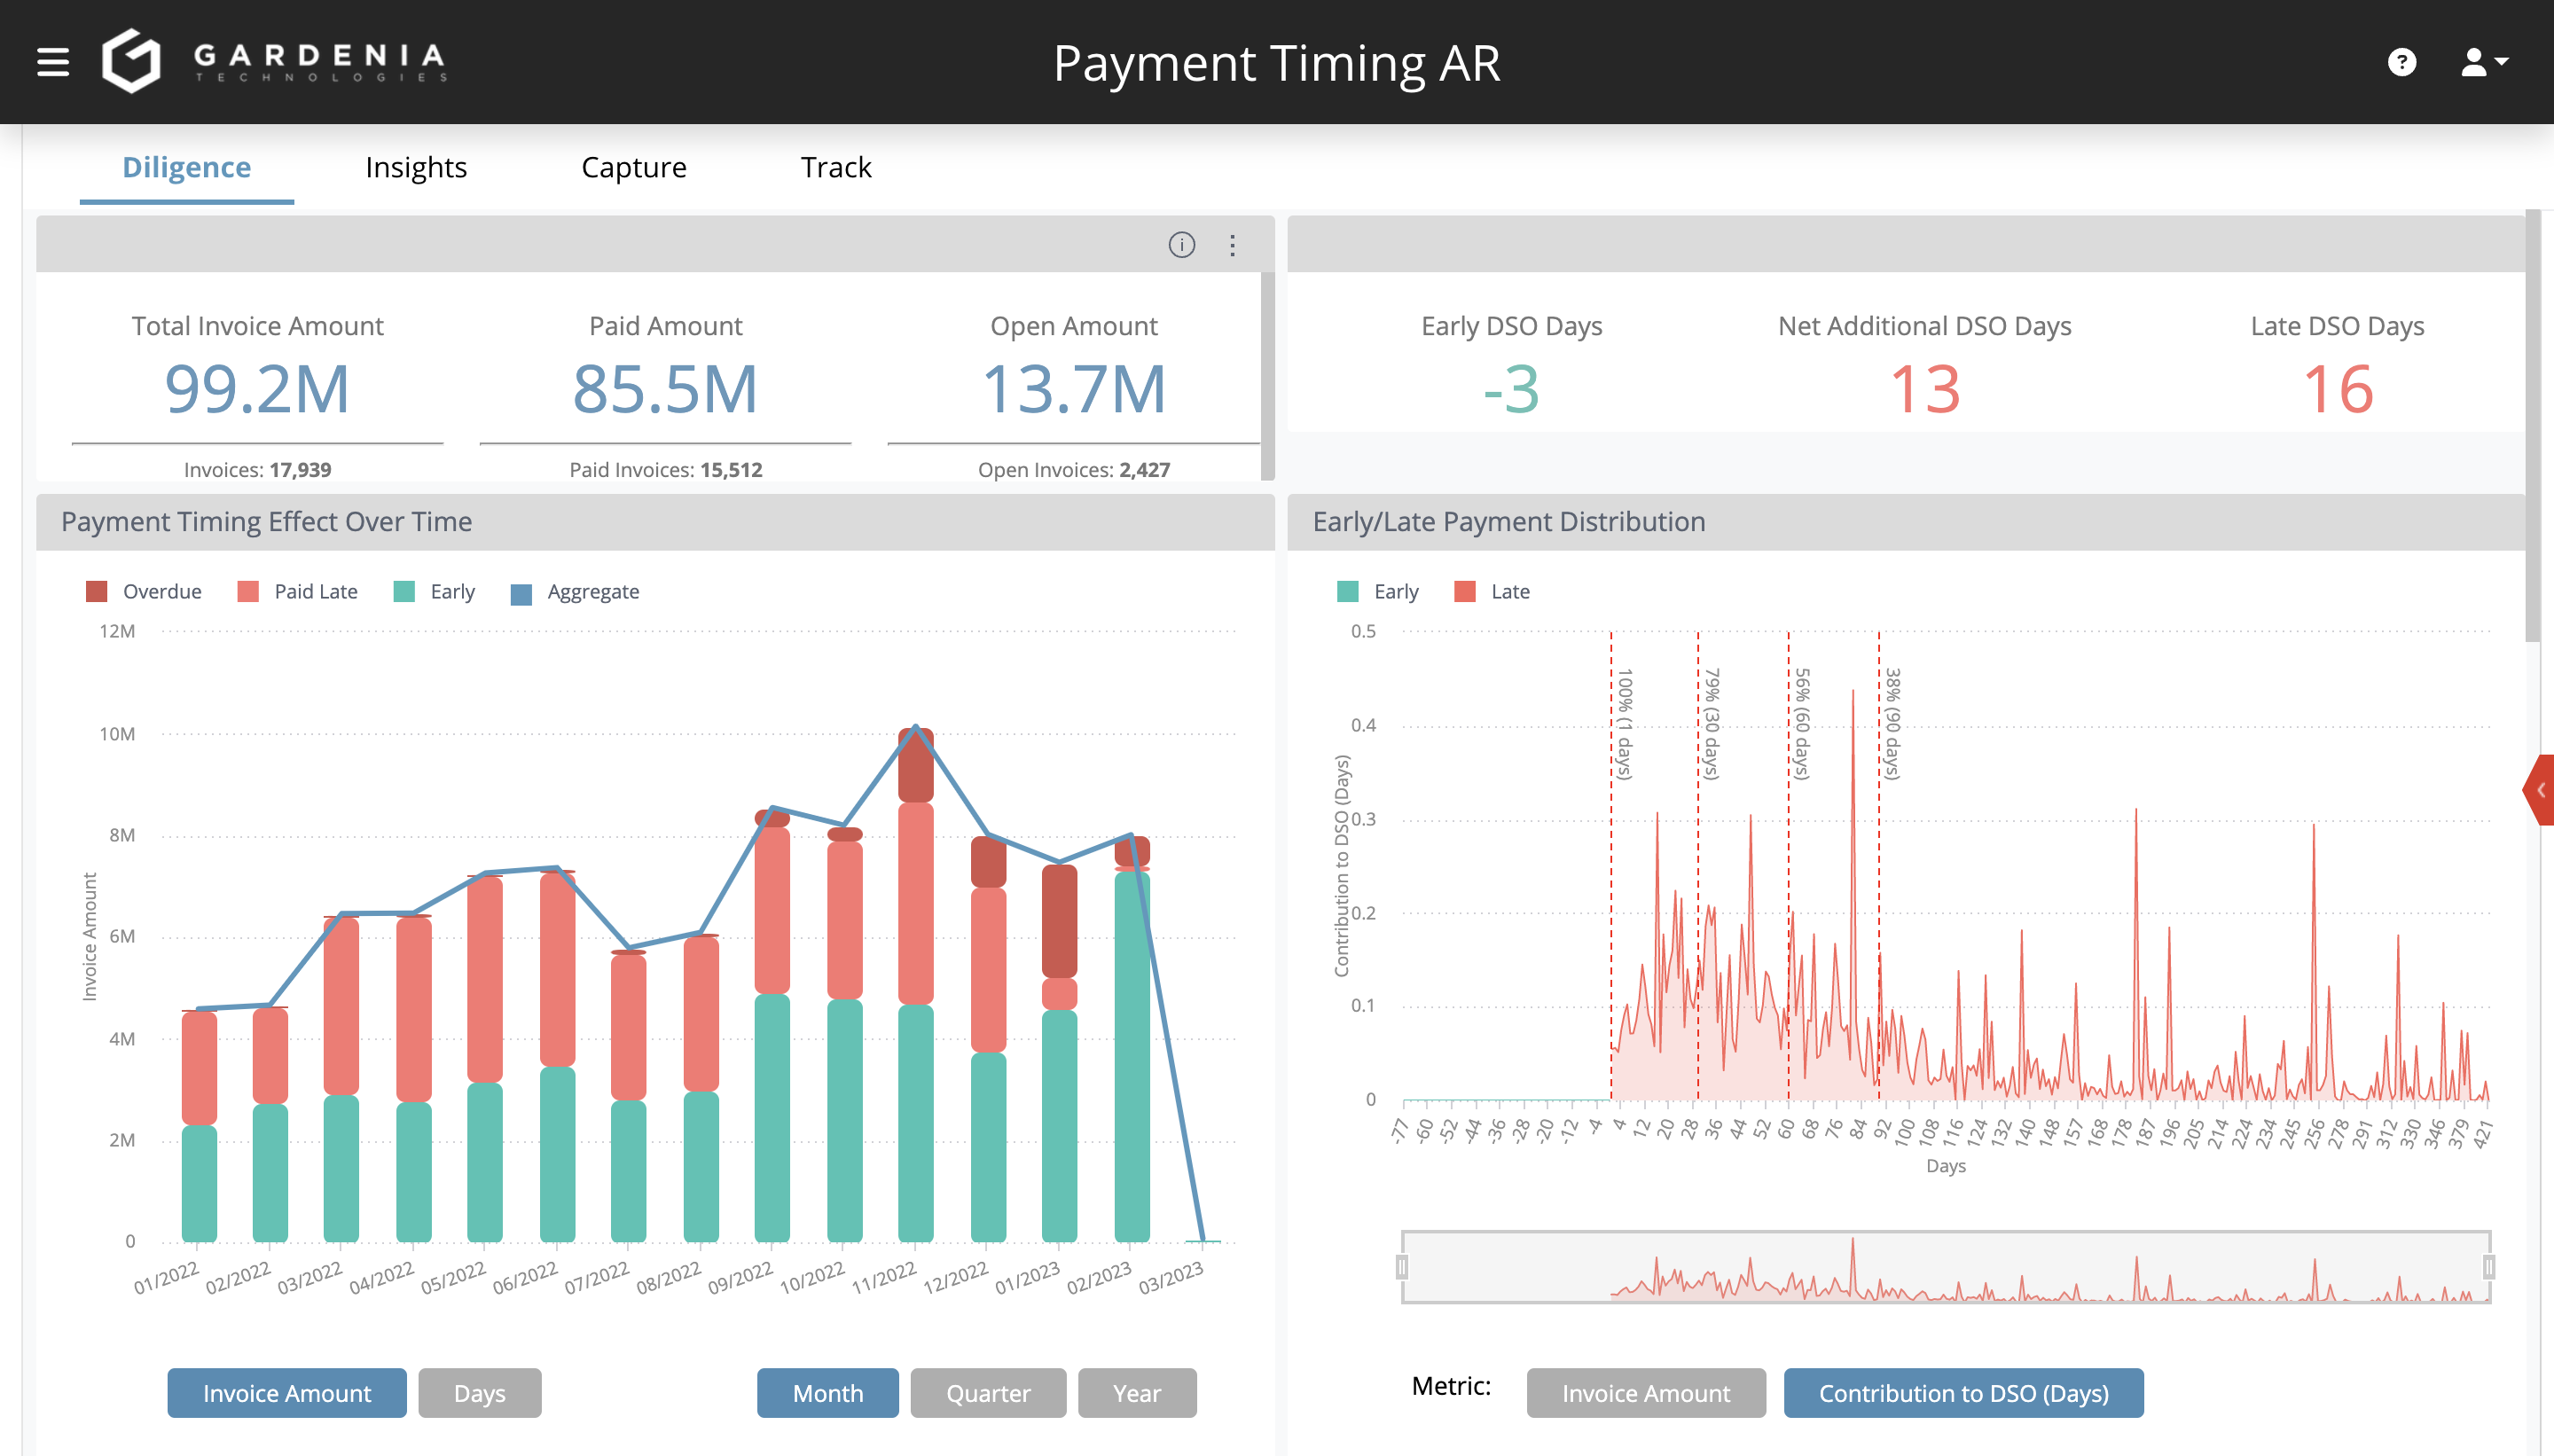 AR Payment Timing is one initiative you can use to improve your working capital and profitability